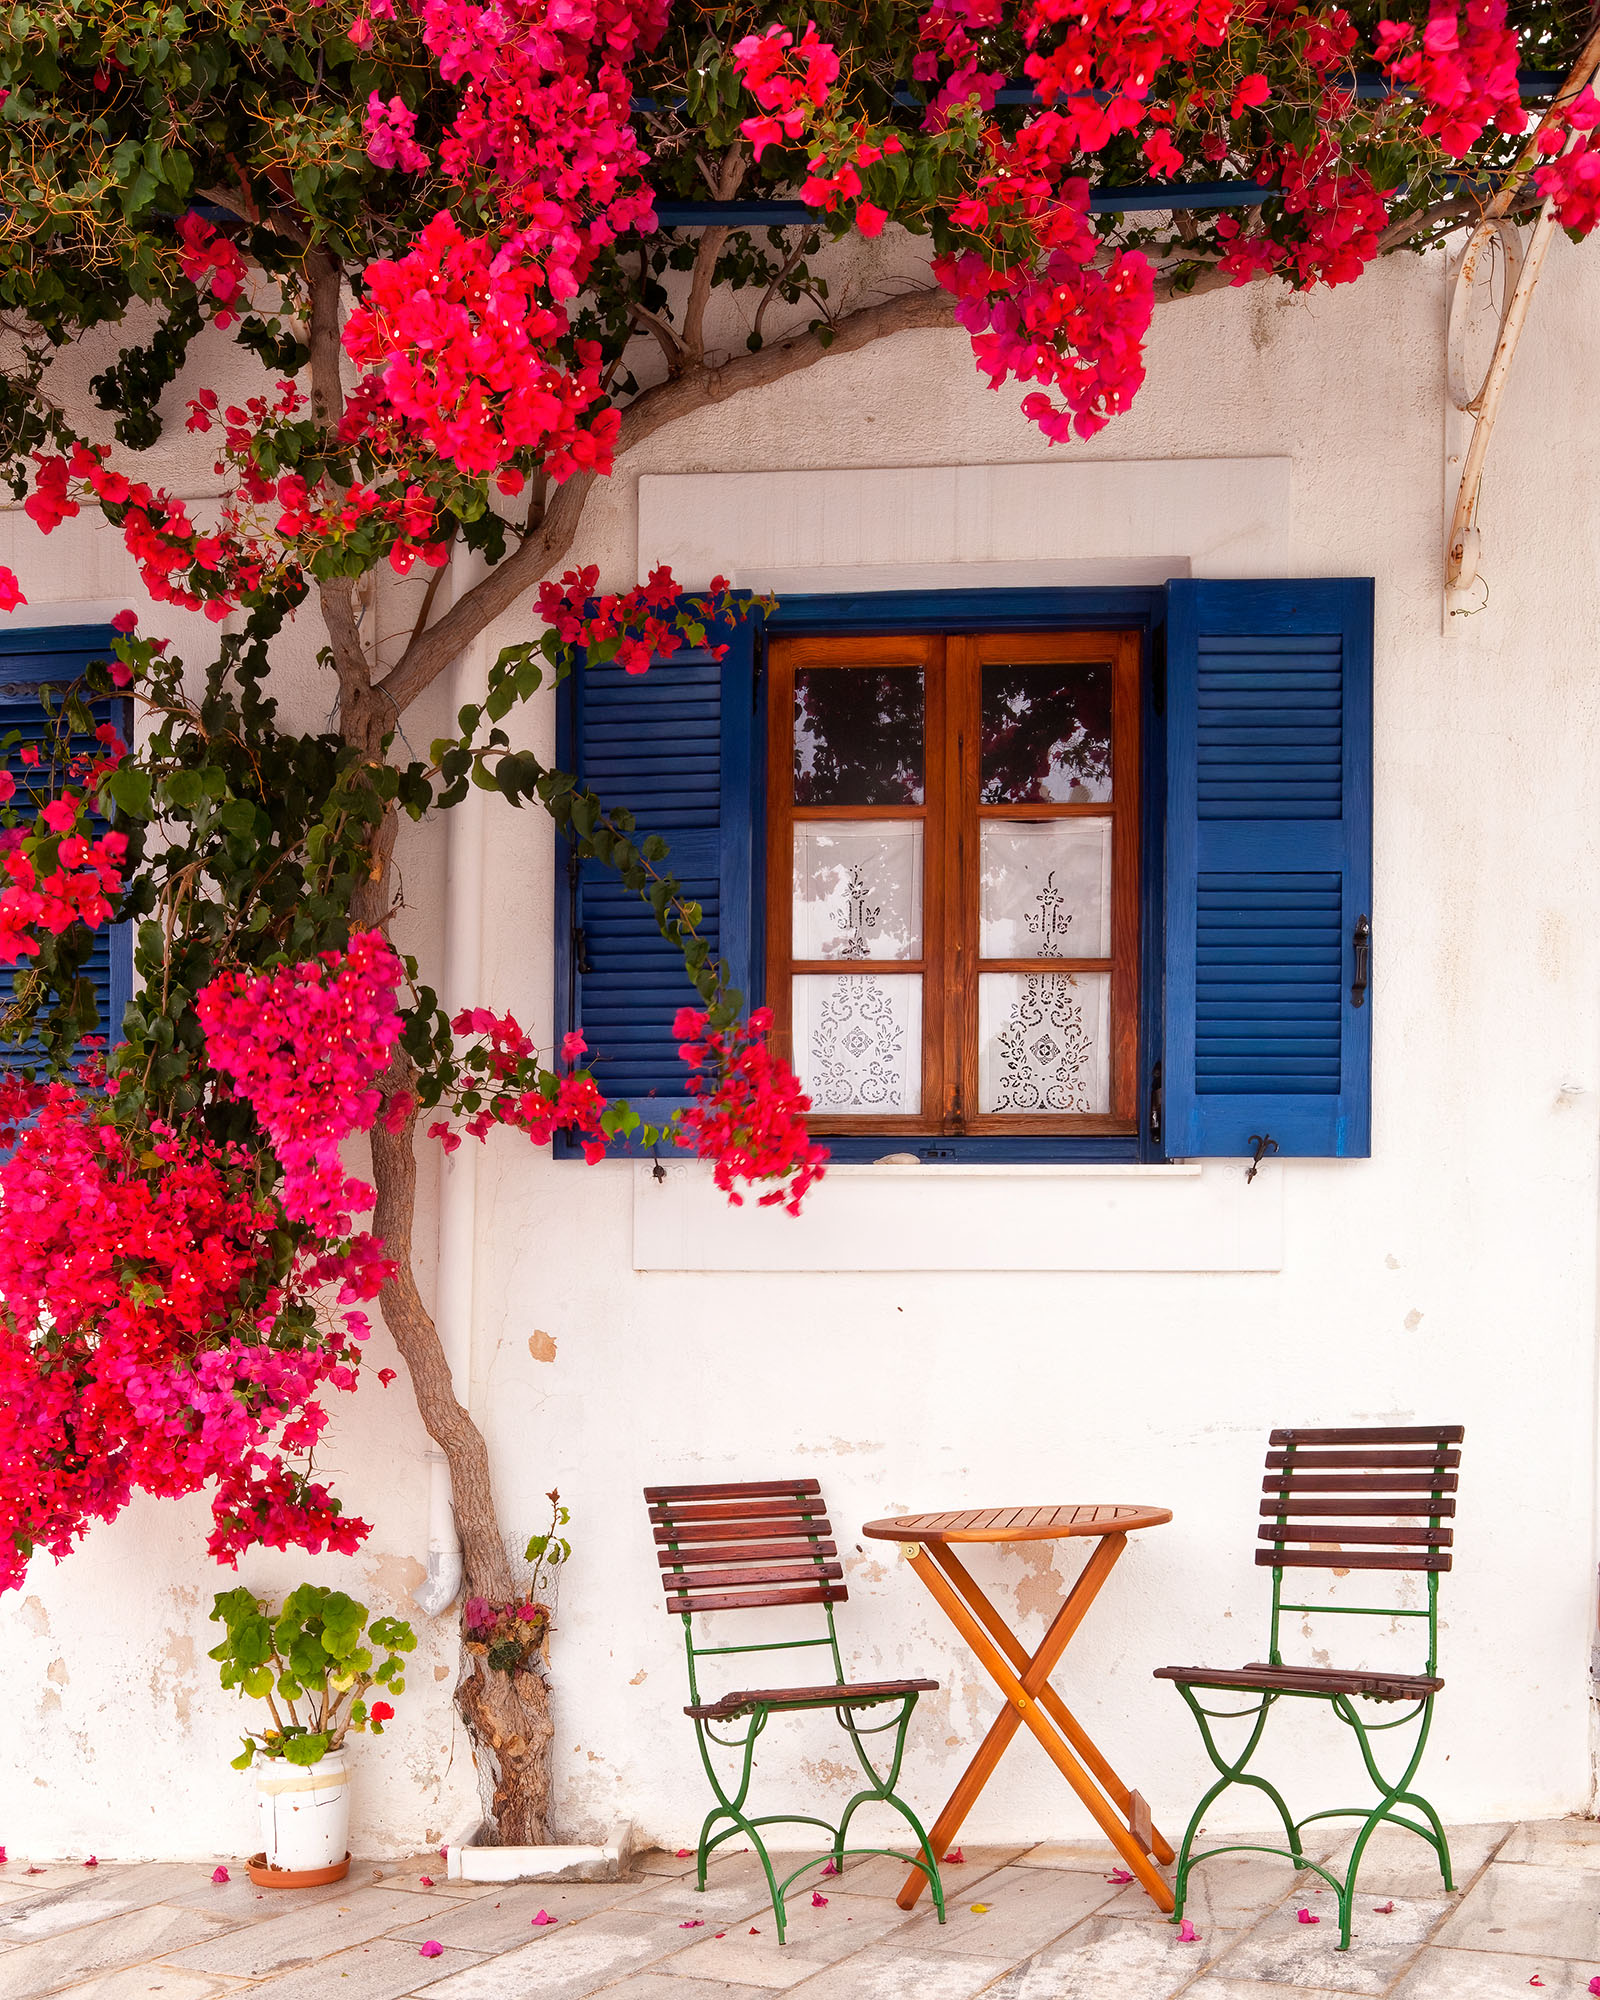 In the picturesque town of Lefkes, Paros, Greece, I discovered a tranquil corner adorned with simple wooden seats and a small...